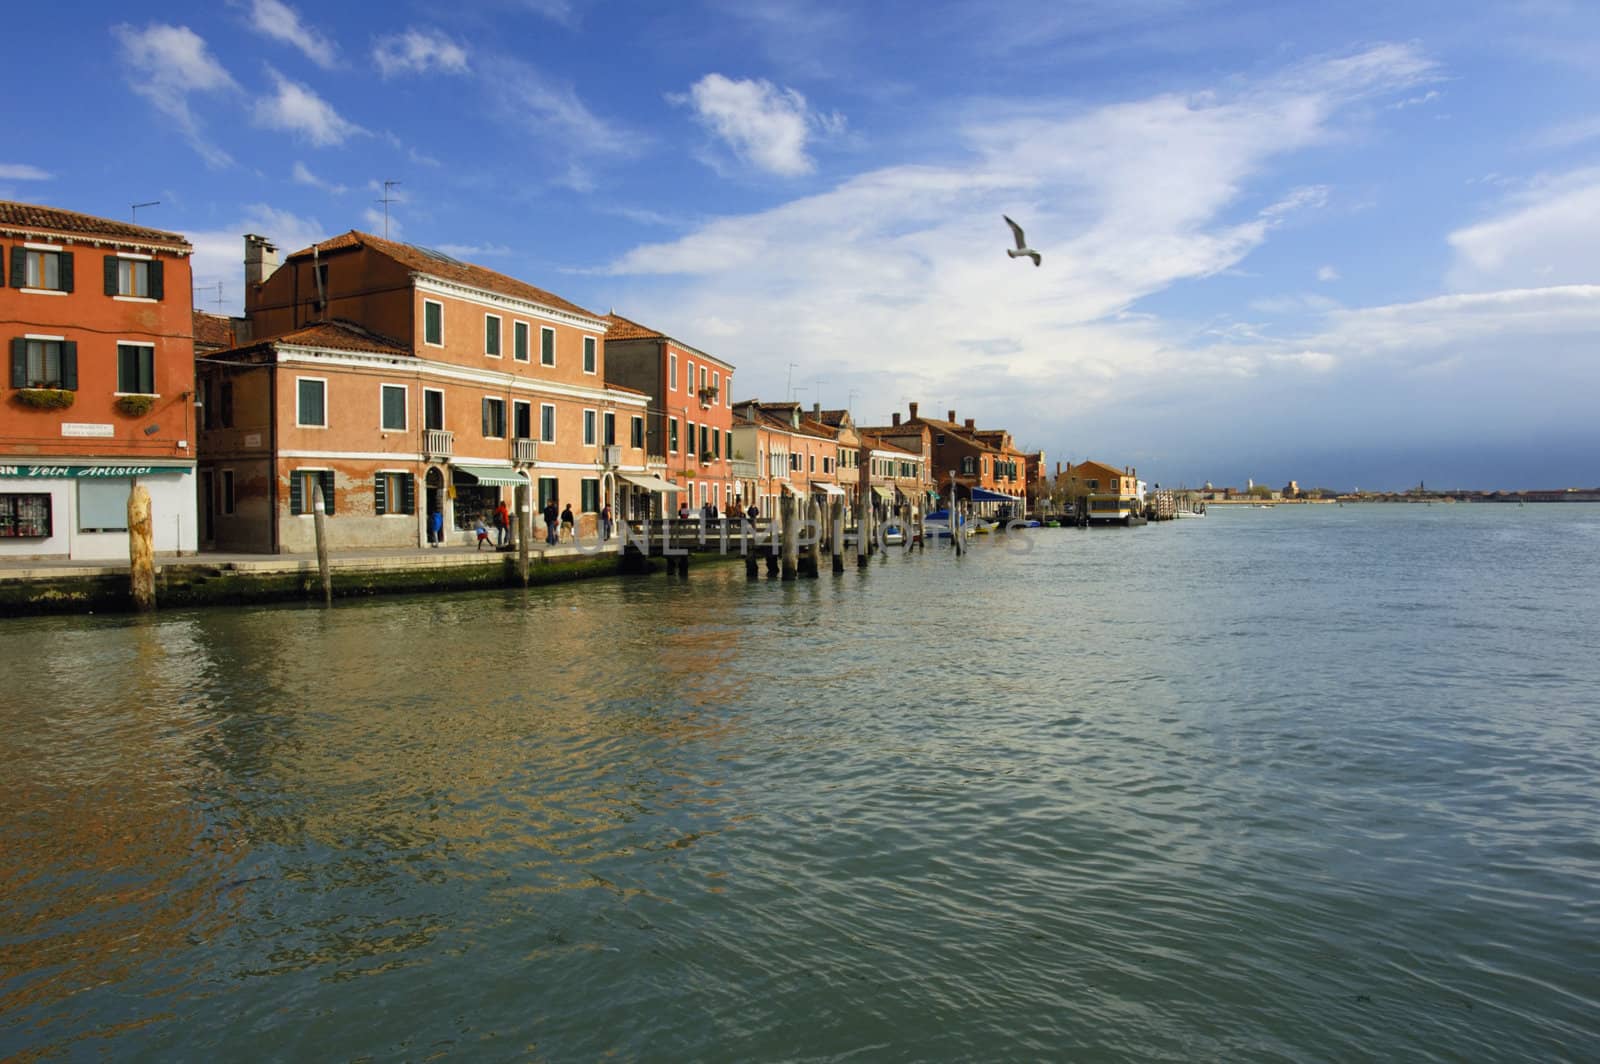 The Venetian island of Murano, famous for its glass-making, in winter sunshine.